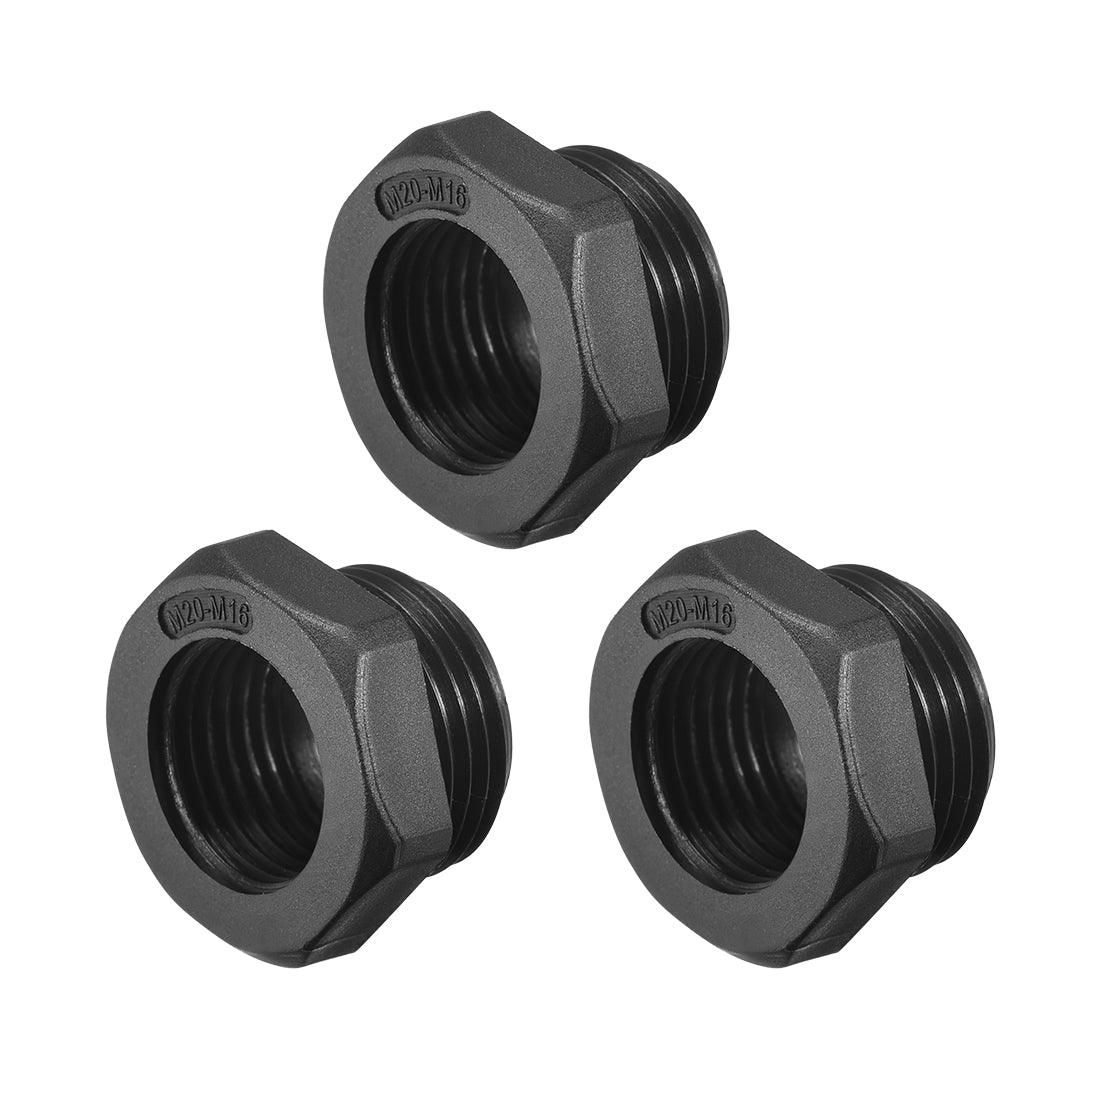 uxcell Uxcell Threaded Reducing Bushings Nylon Connector Adaptor M20 Male Thread to M16 Female Thread Black , 3 Pcs